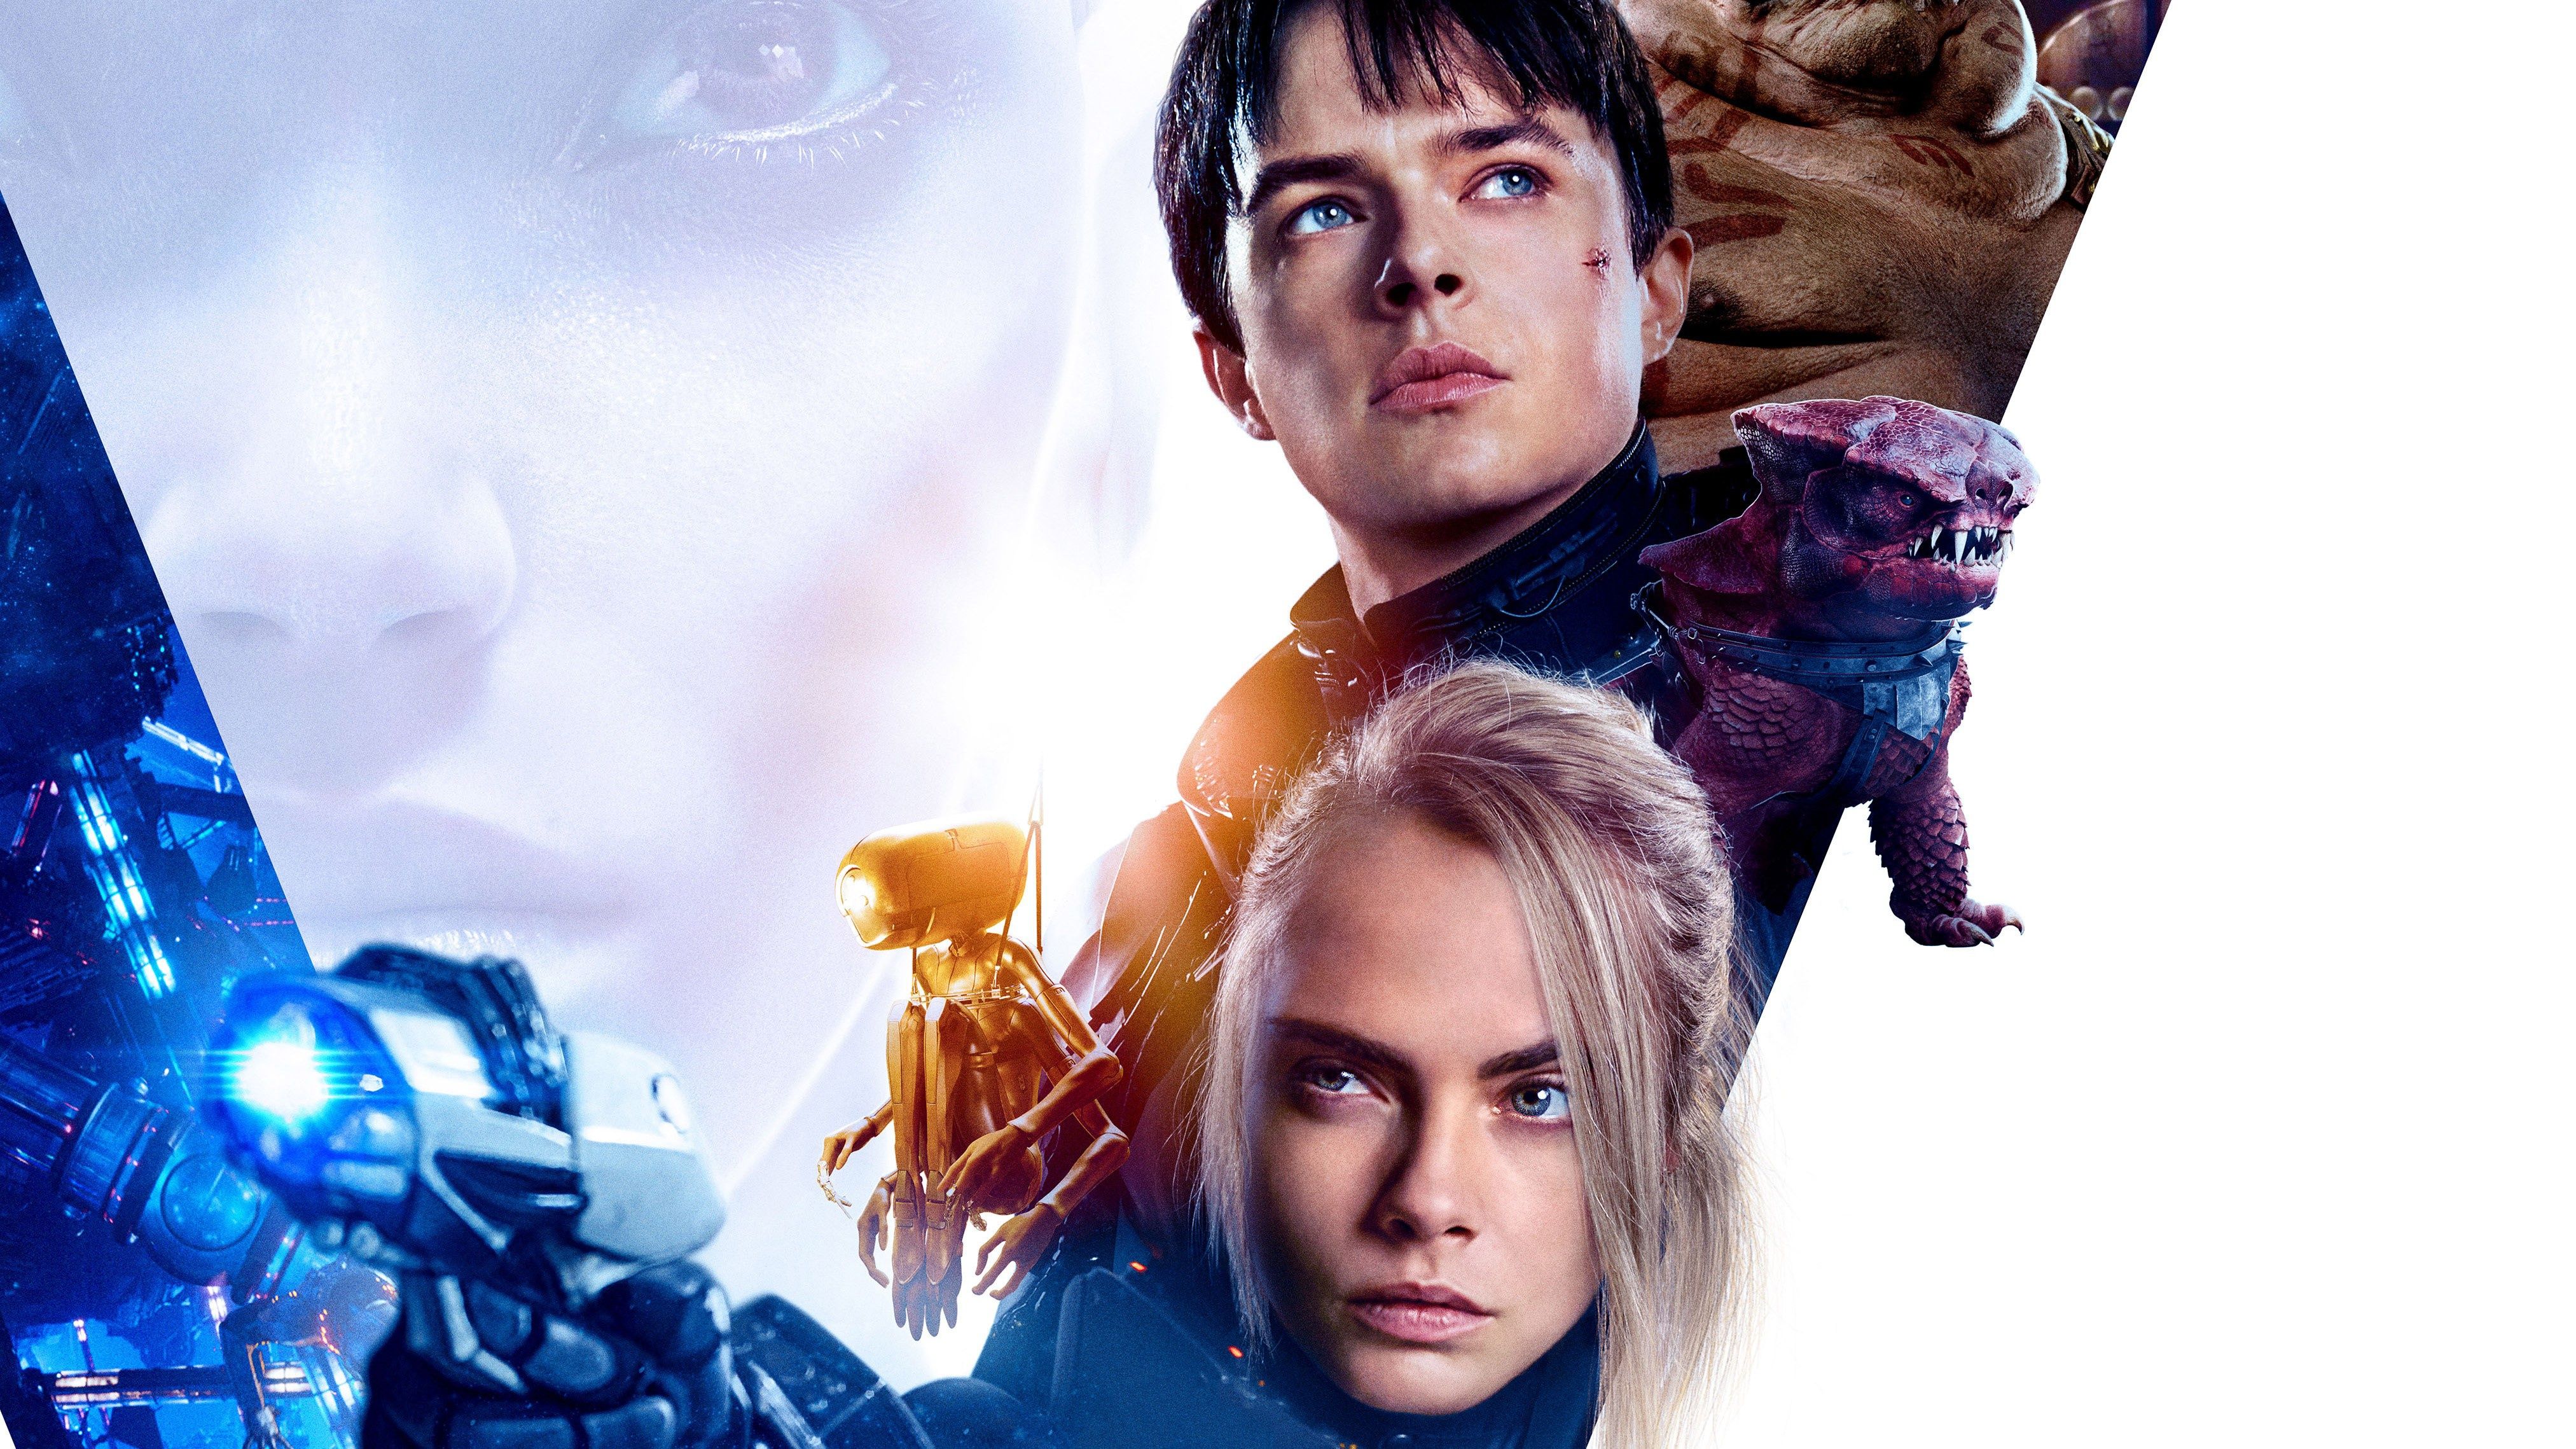 Valerian and the City of a Thousand Planets 4k Ultra HD Wallpaper